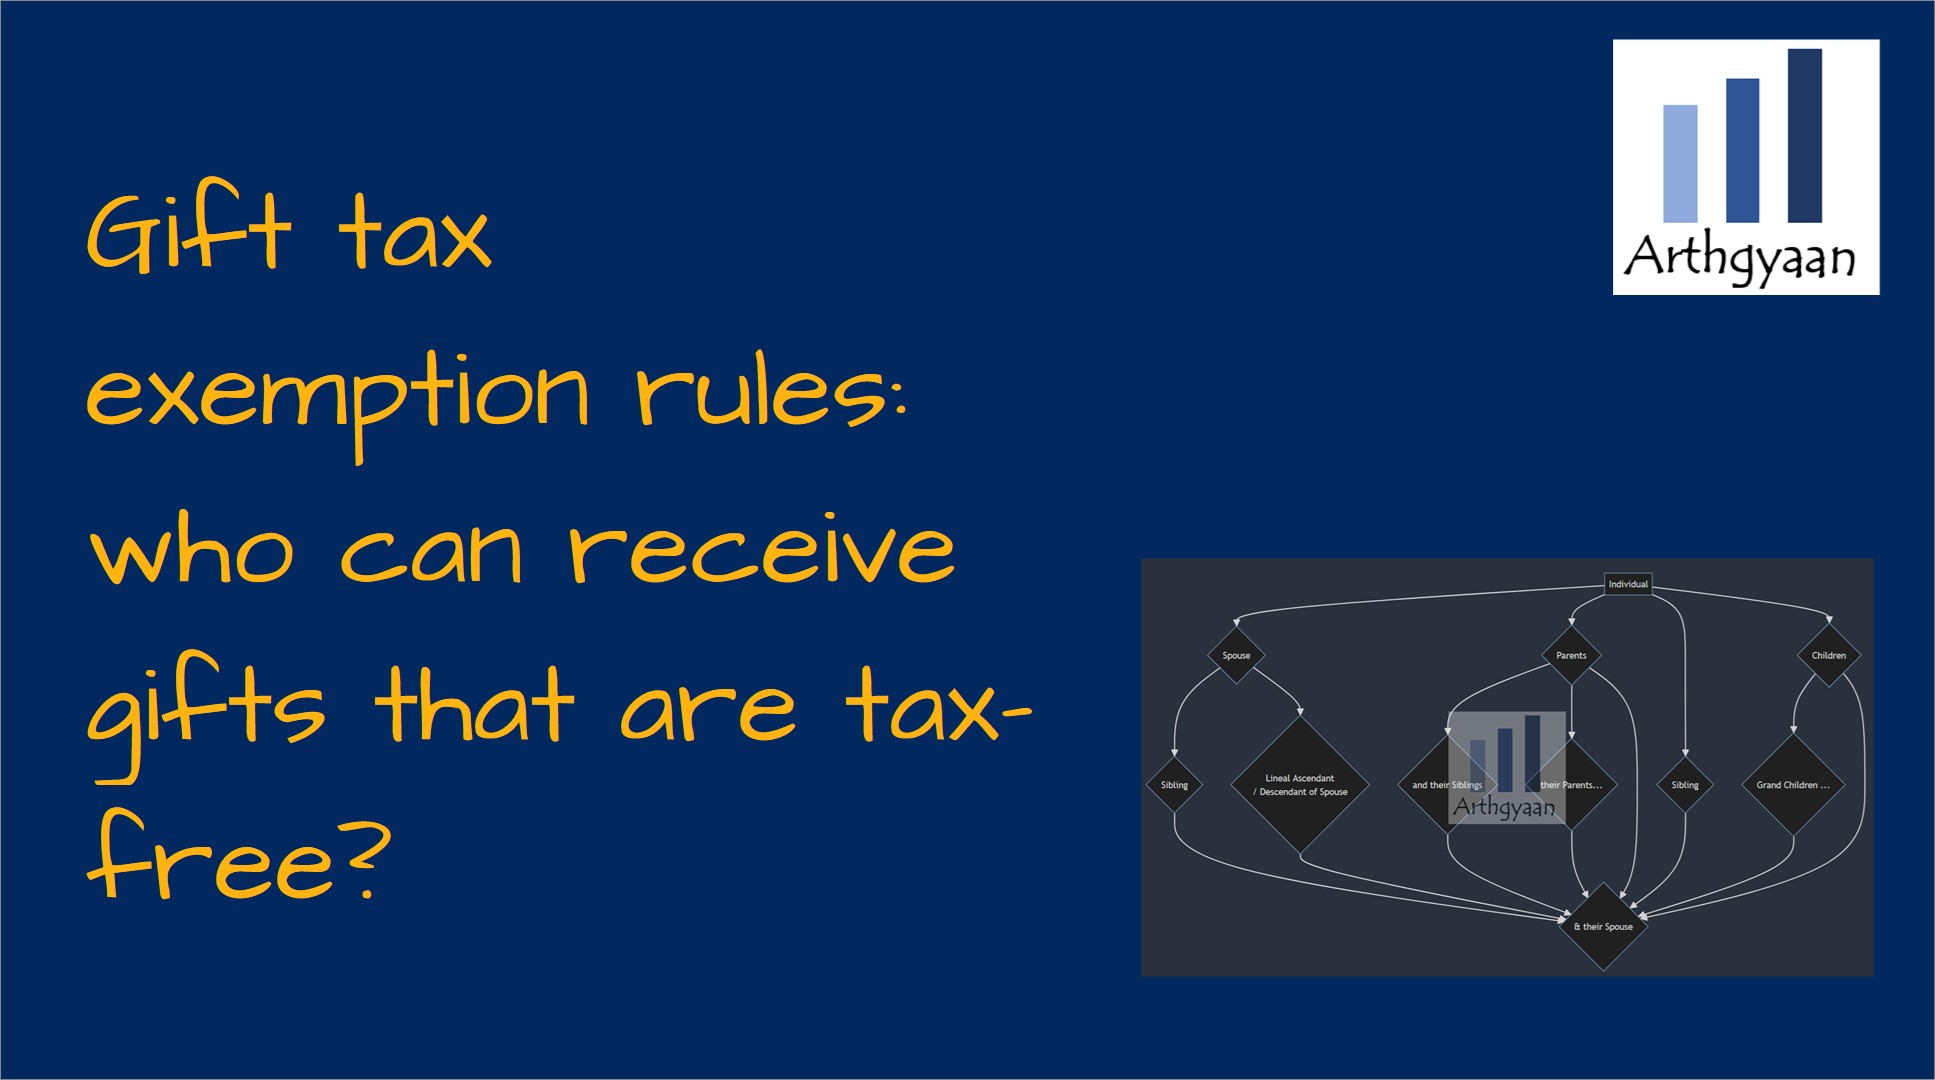 Tax matters: Uncle's gift is tax free | Tax matters: Uncle's gift is tax  free